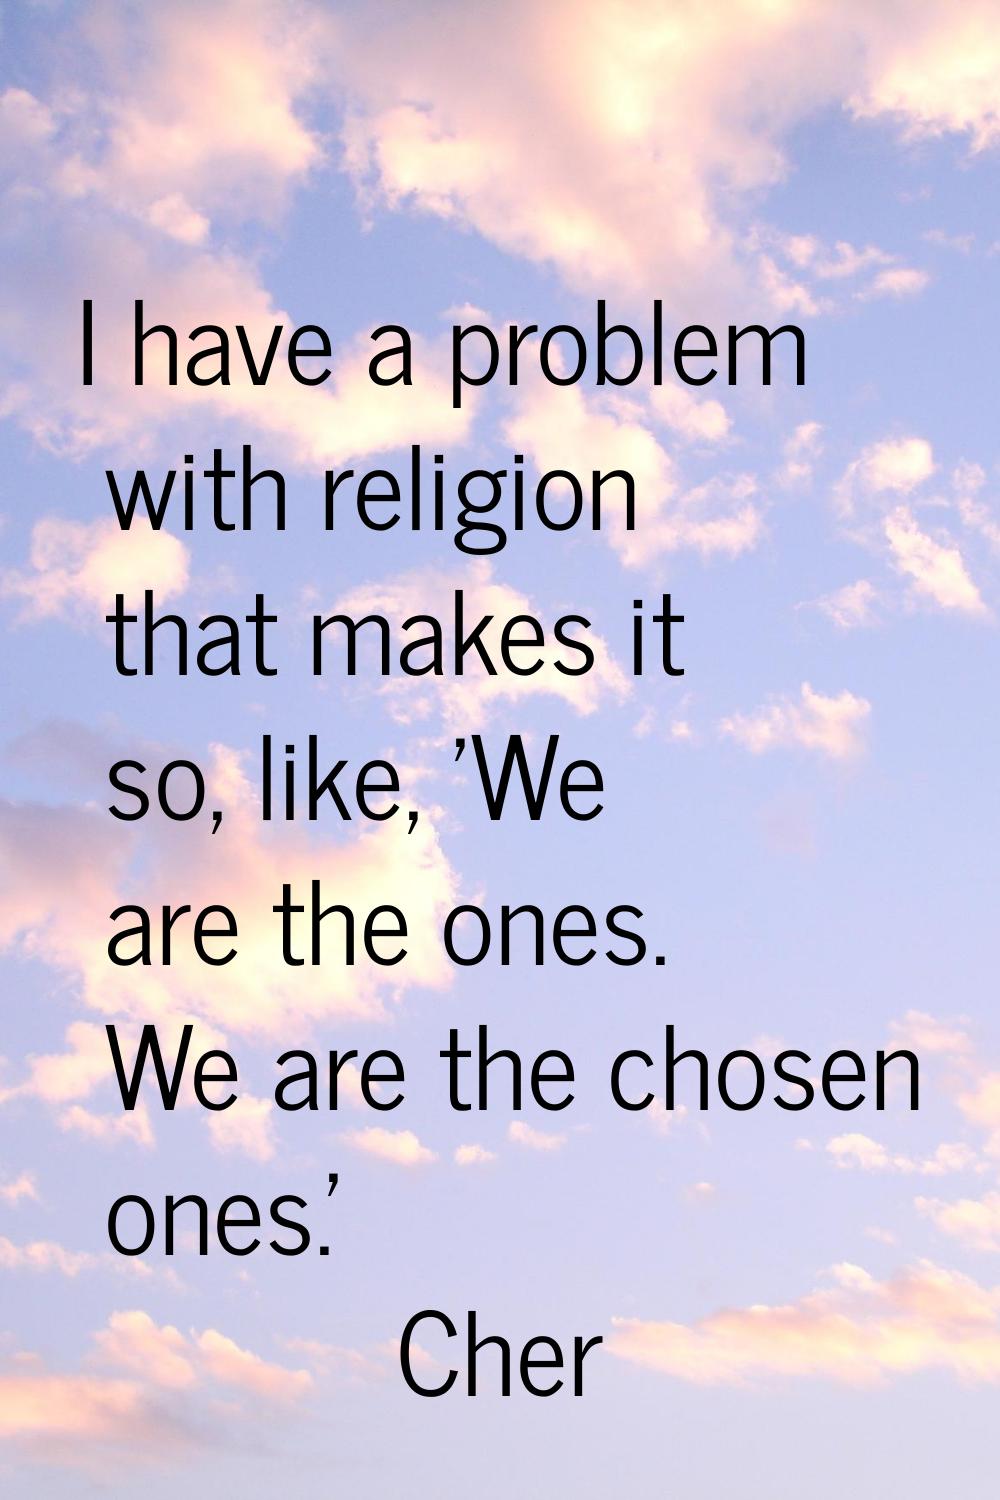 I have a problem with religion that makes it so, like, 'We are the ones. We are the chosen ones.'